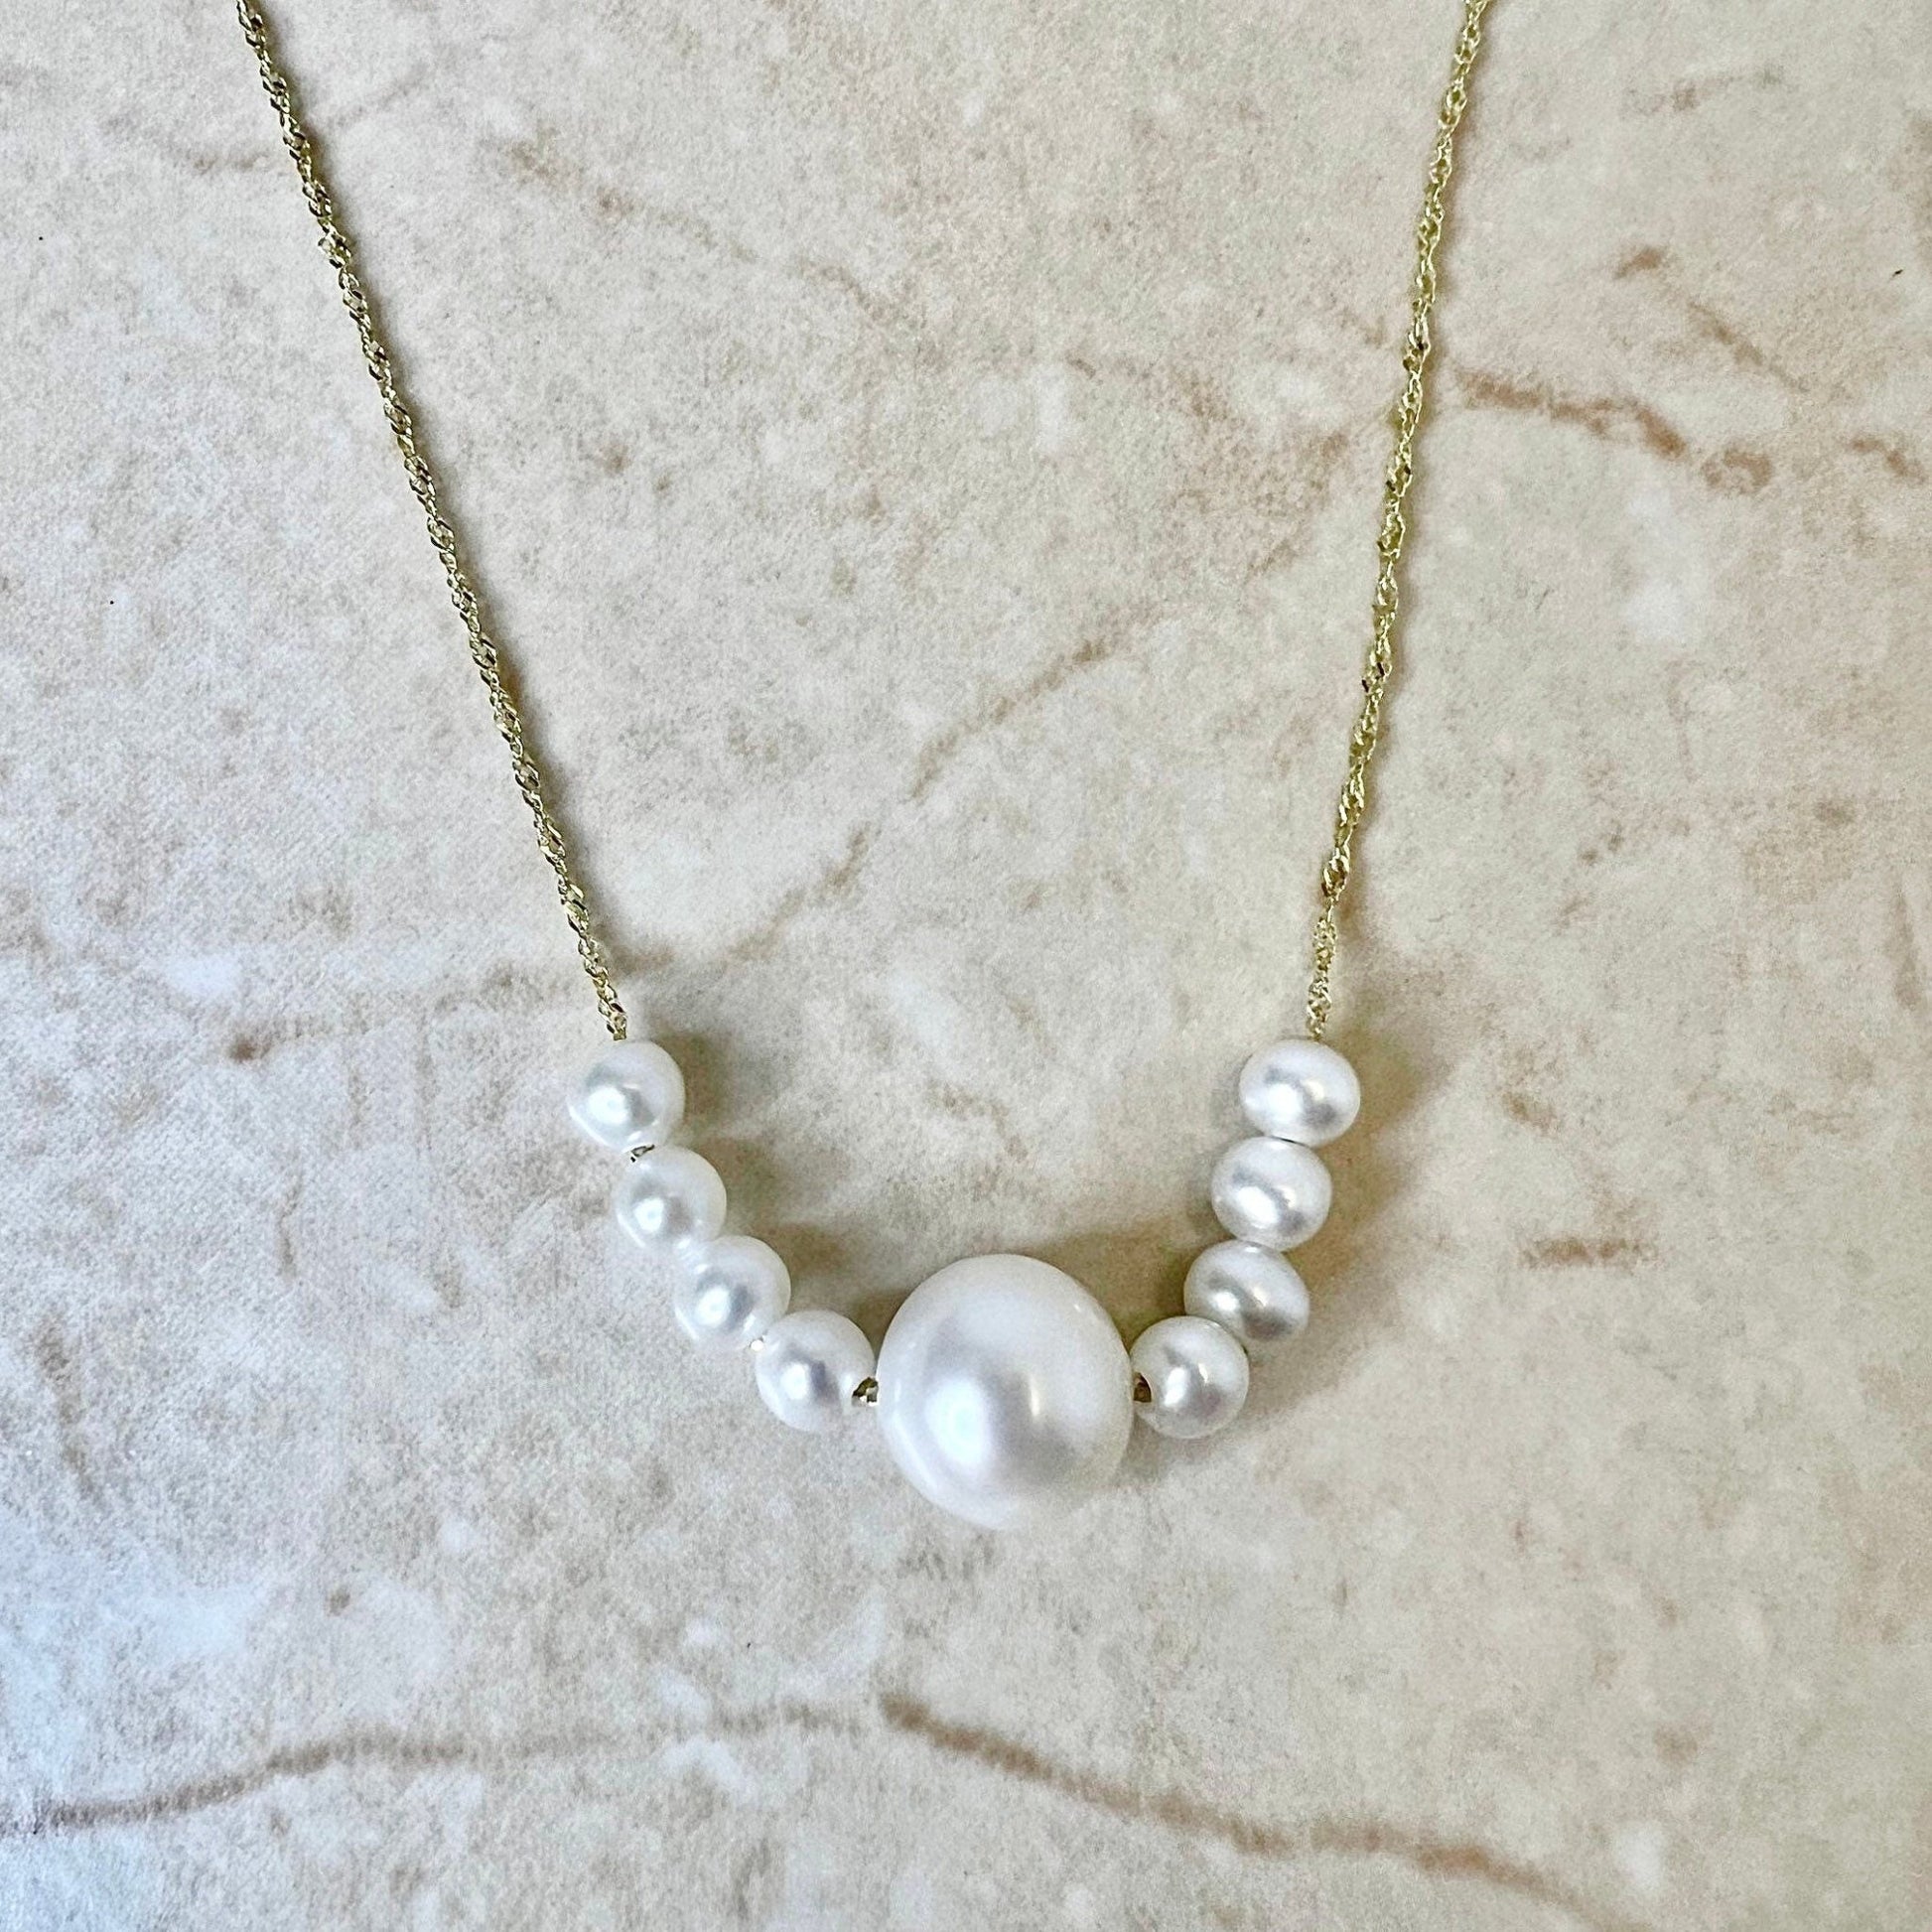 14K White Pearl Pendant Necklace - Yellow Gold Genuine Pearl Necklace - Freshwater Pearl - Birthday Gift - June Birthstone - Holiday Gift